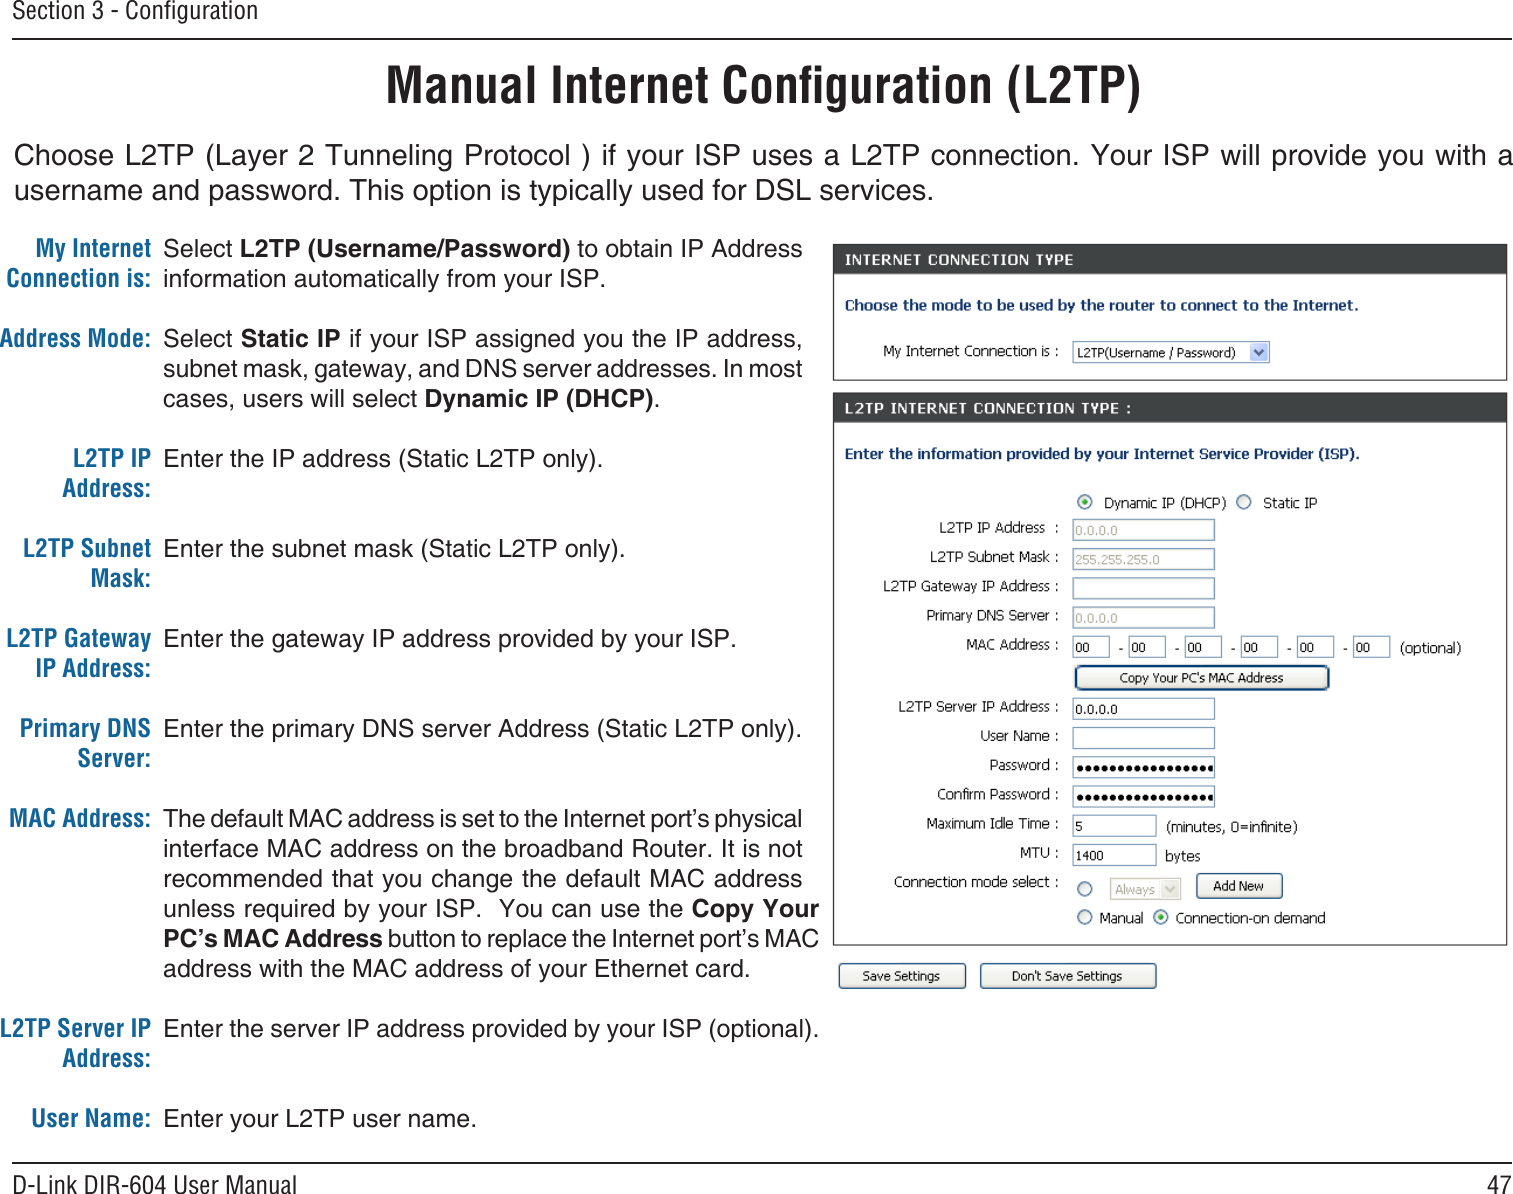 47D-Link DIR-604 User ManualSection 3 - ConﬁgurationChoose L2TP (Layer 2 Tunneling Protocol ) if your ISP uses a L2TP connection. Your ISP will provide you with a username and password. This option is typically used for DSL services. Manual Internet Conﬁguration (L2TP)Select L2TP (Username/Password) to obtain IP Address information automatically from your ISP. Select Static IP if your ISP assigned you the IP address, subnet mask, gateway, and DNS server addresses. In most cases, users will select Dynamic IP (DHCP).Enter the IP address (Static L2TP only).Enter the subnet mask (Static L2TP only).Enter the gateway IP address provided by your ISP.Enter the primary DNS server Address (Static L2TP only).The default MAC address is set to the Internet port’s physical interface MAC address on the broadband Router. It is not recommended that you change the default MAC address unless required by your ISP.  You can use the Copy Your PC’s MAC Address button to replace the Internet port’s MAC address with the MAC address of your Ethernet card.Enter the server IP address provided by your ISP (optional).Enter your L2TP user name.My Internet Connection is:Address Mode: L2TP IP Address:L2TP Subnet Mask:L2TP Gateway IP Address:Primary DNS Server:MAC Address:L2TP Server IP Address:User Name: